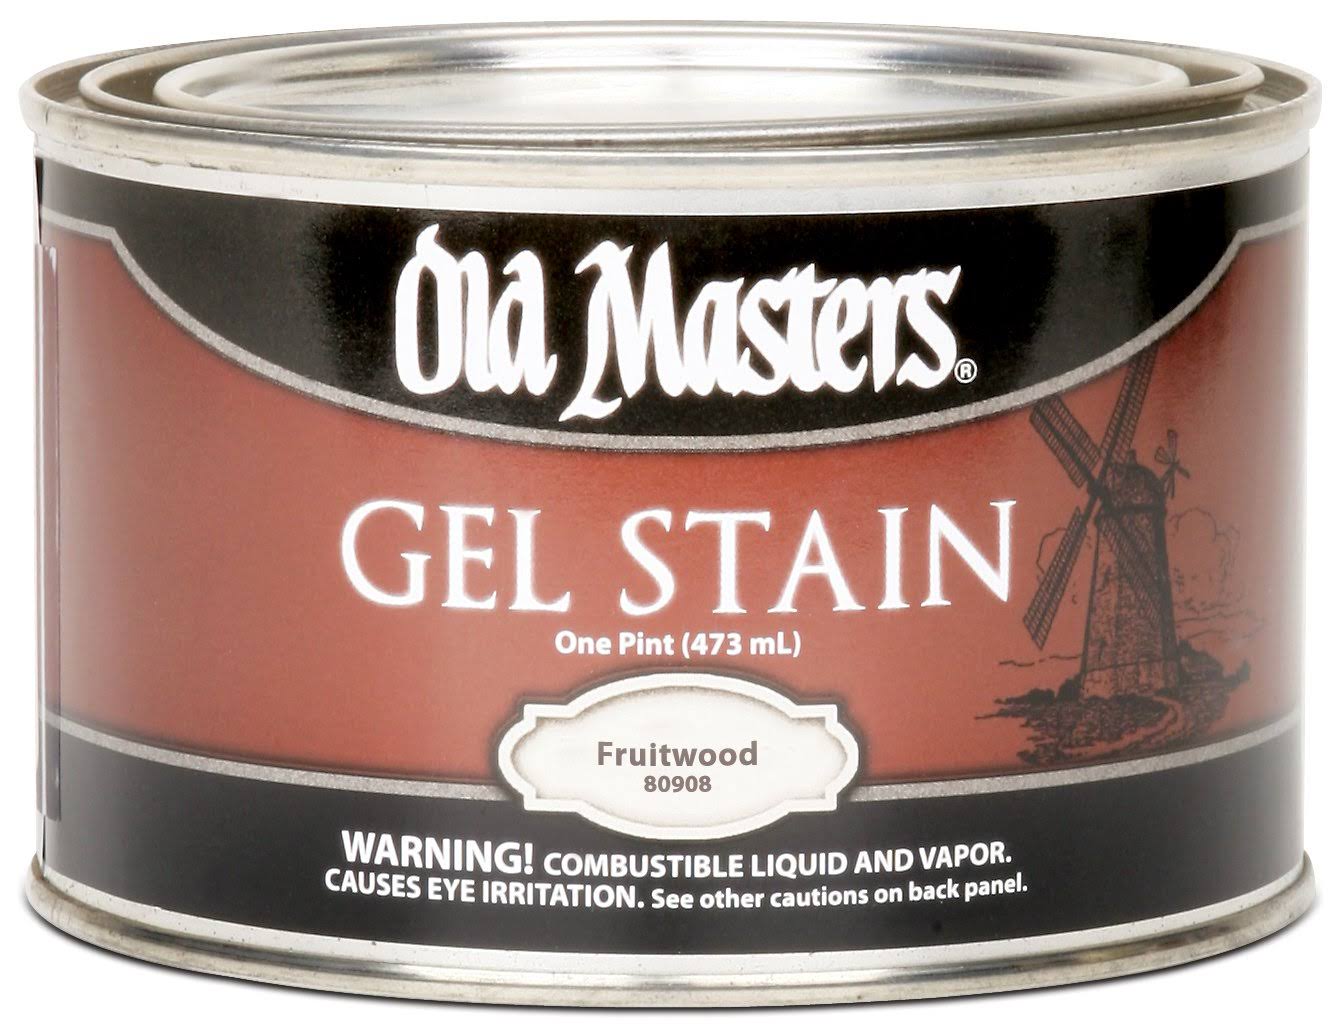 Old Masters 80908 Oil Based Gel Stain - Fruitwood, 1 Pint